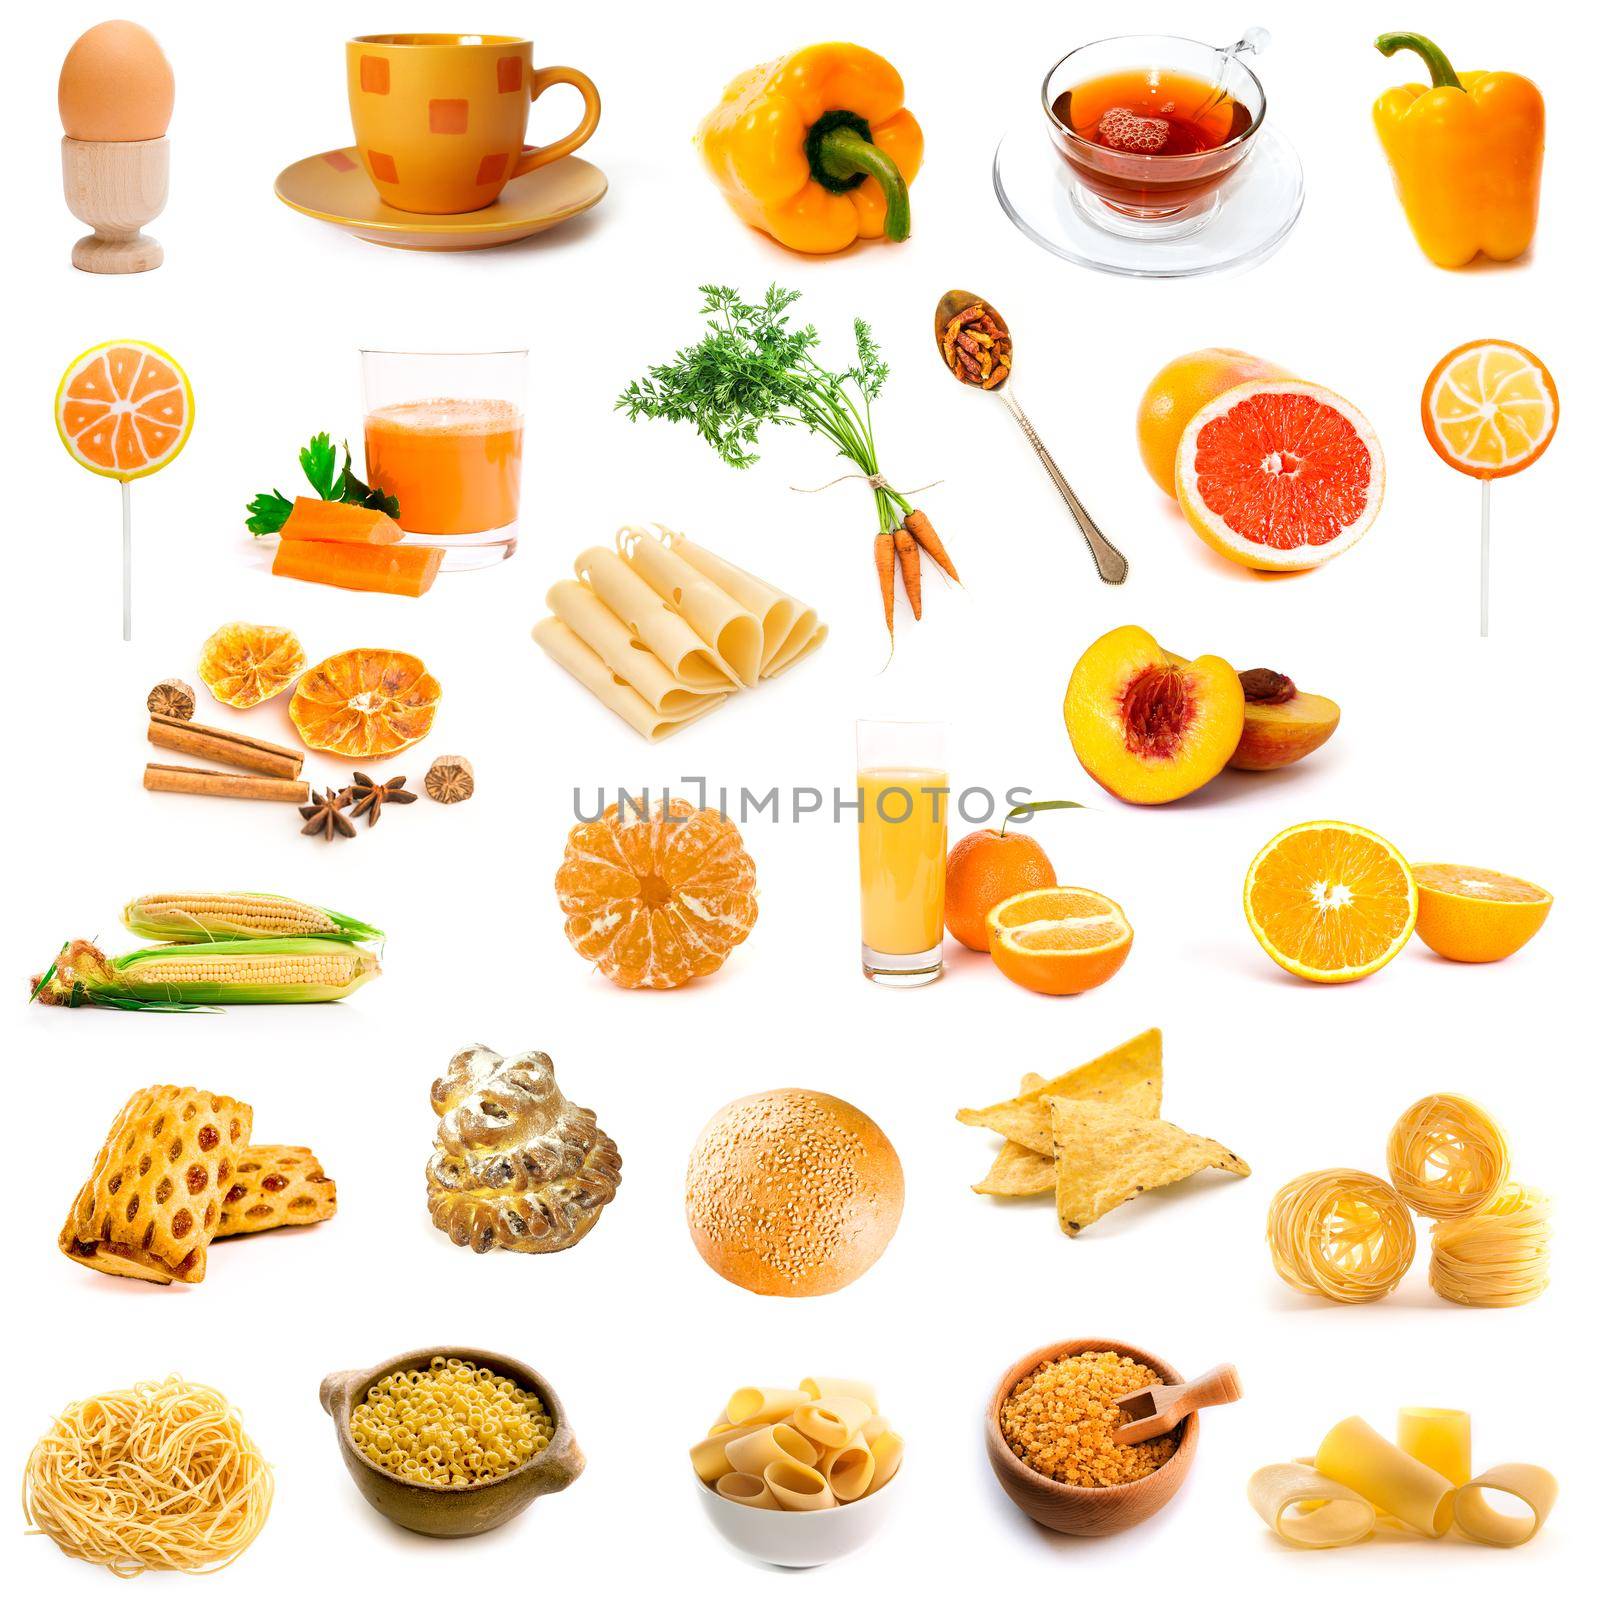 orange and yellow color products collage isolated on white background